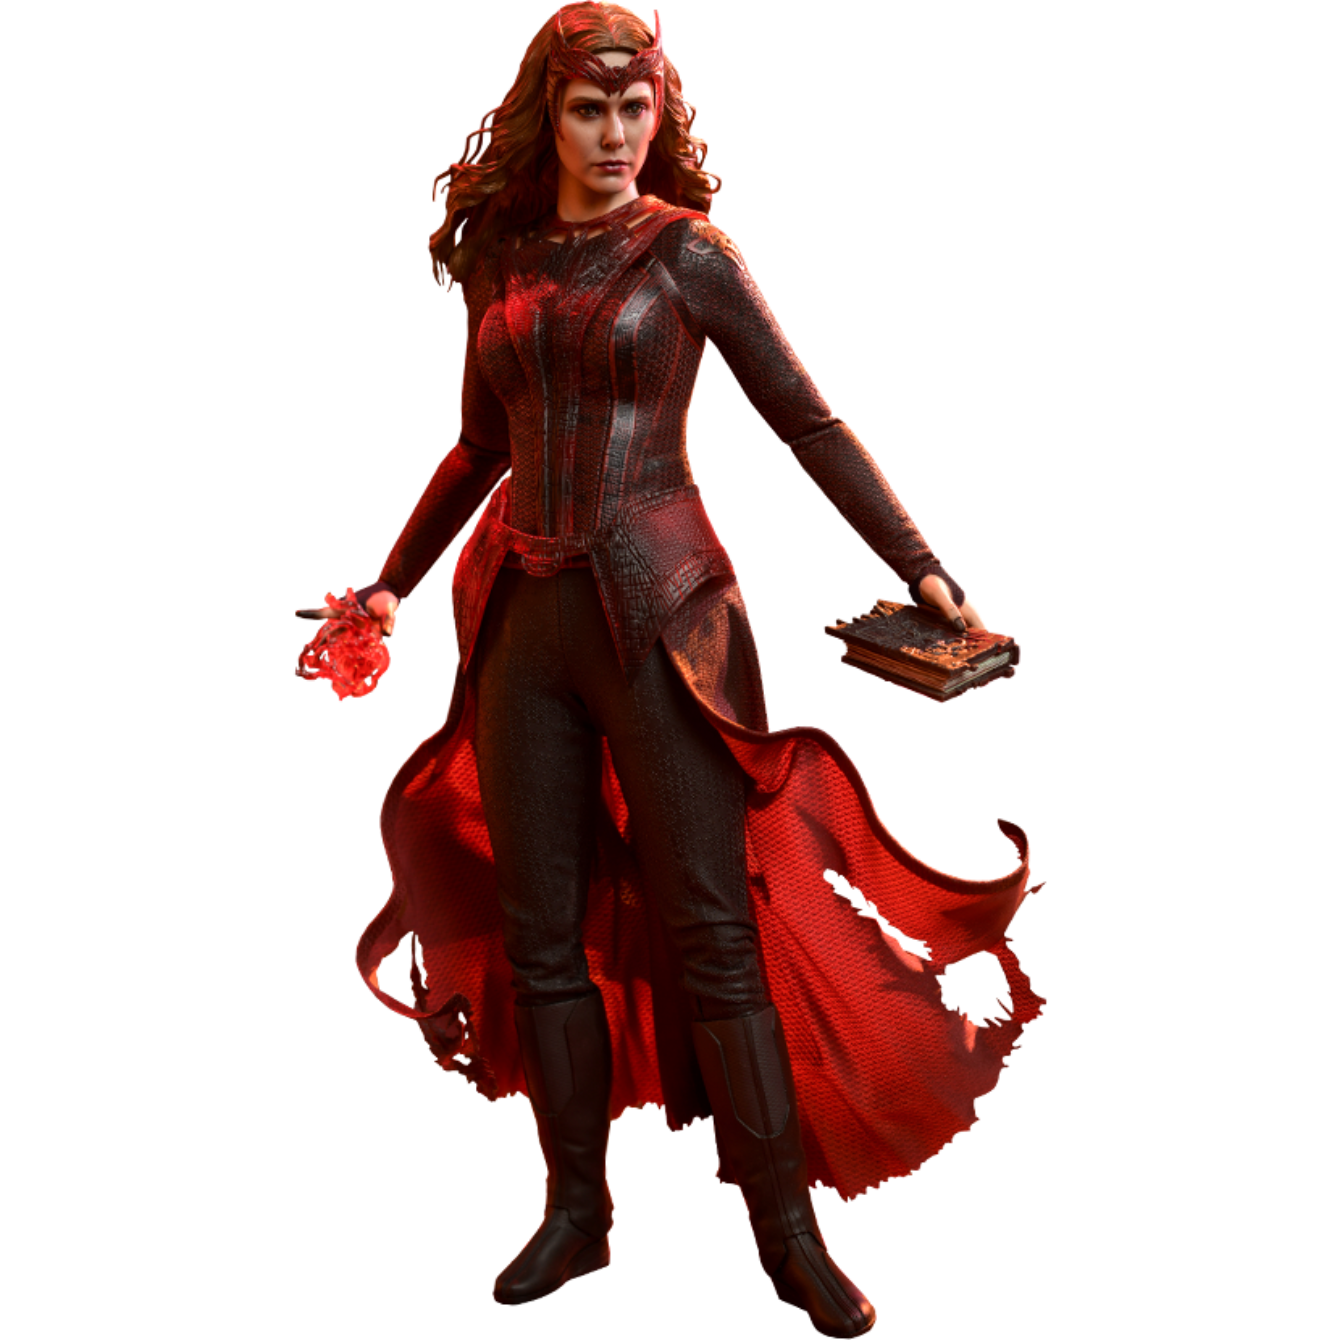 Pre-Order The Scarlet Witch Sixth Scale Figure